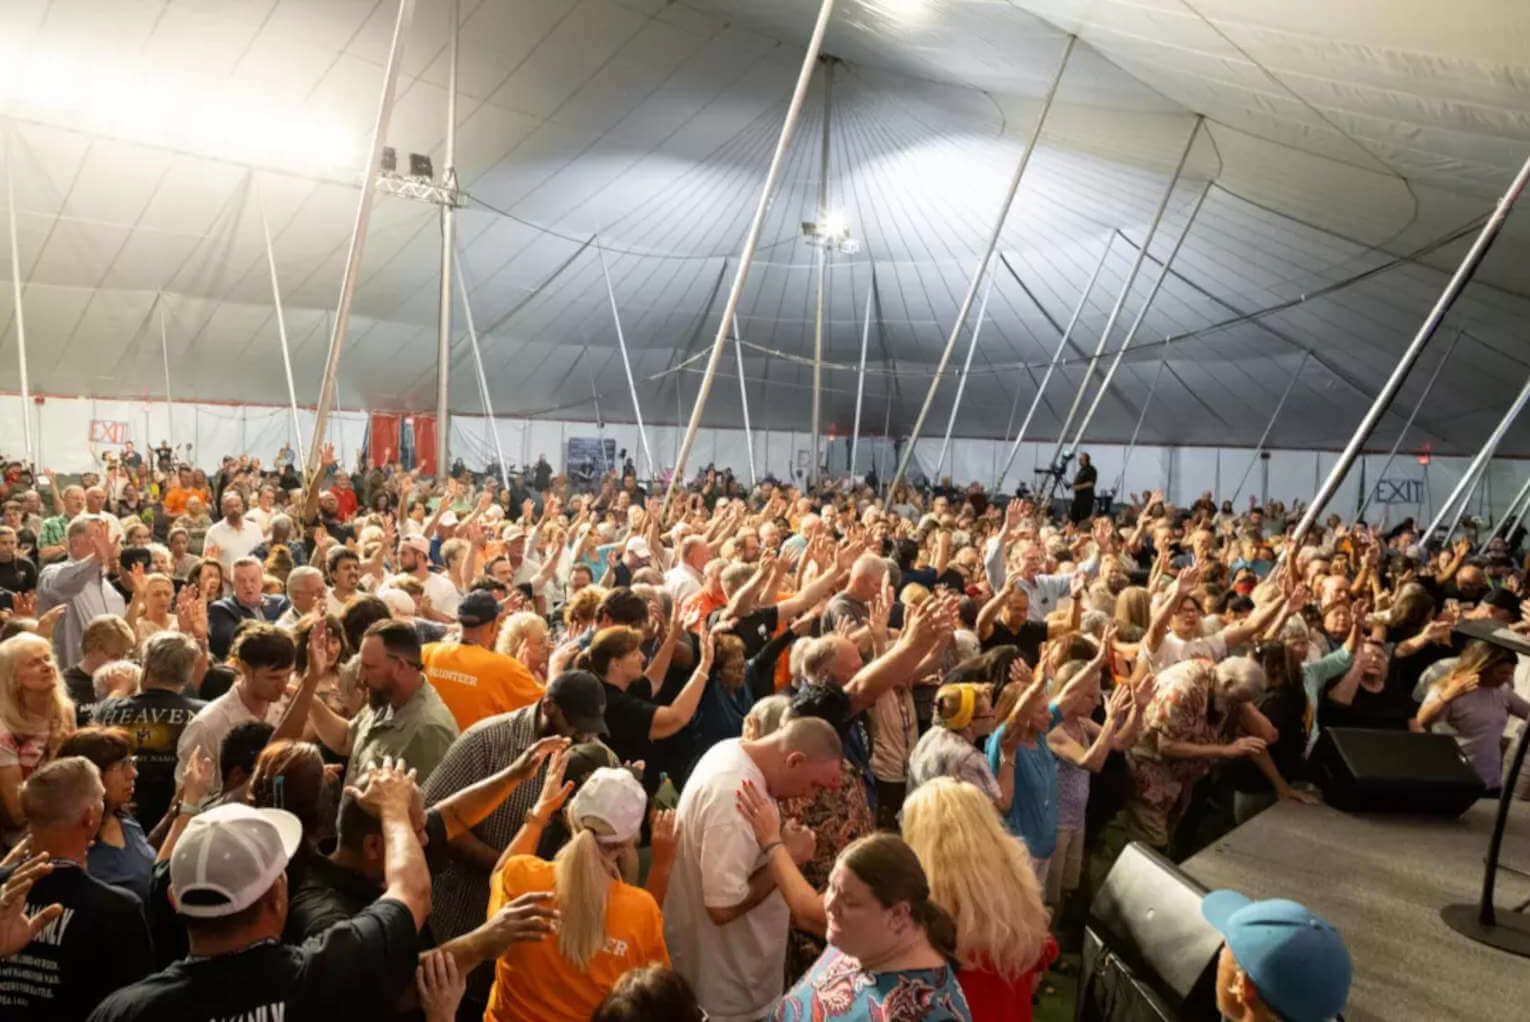 The Holy Spirit Ignites the Tent in Phoenix